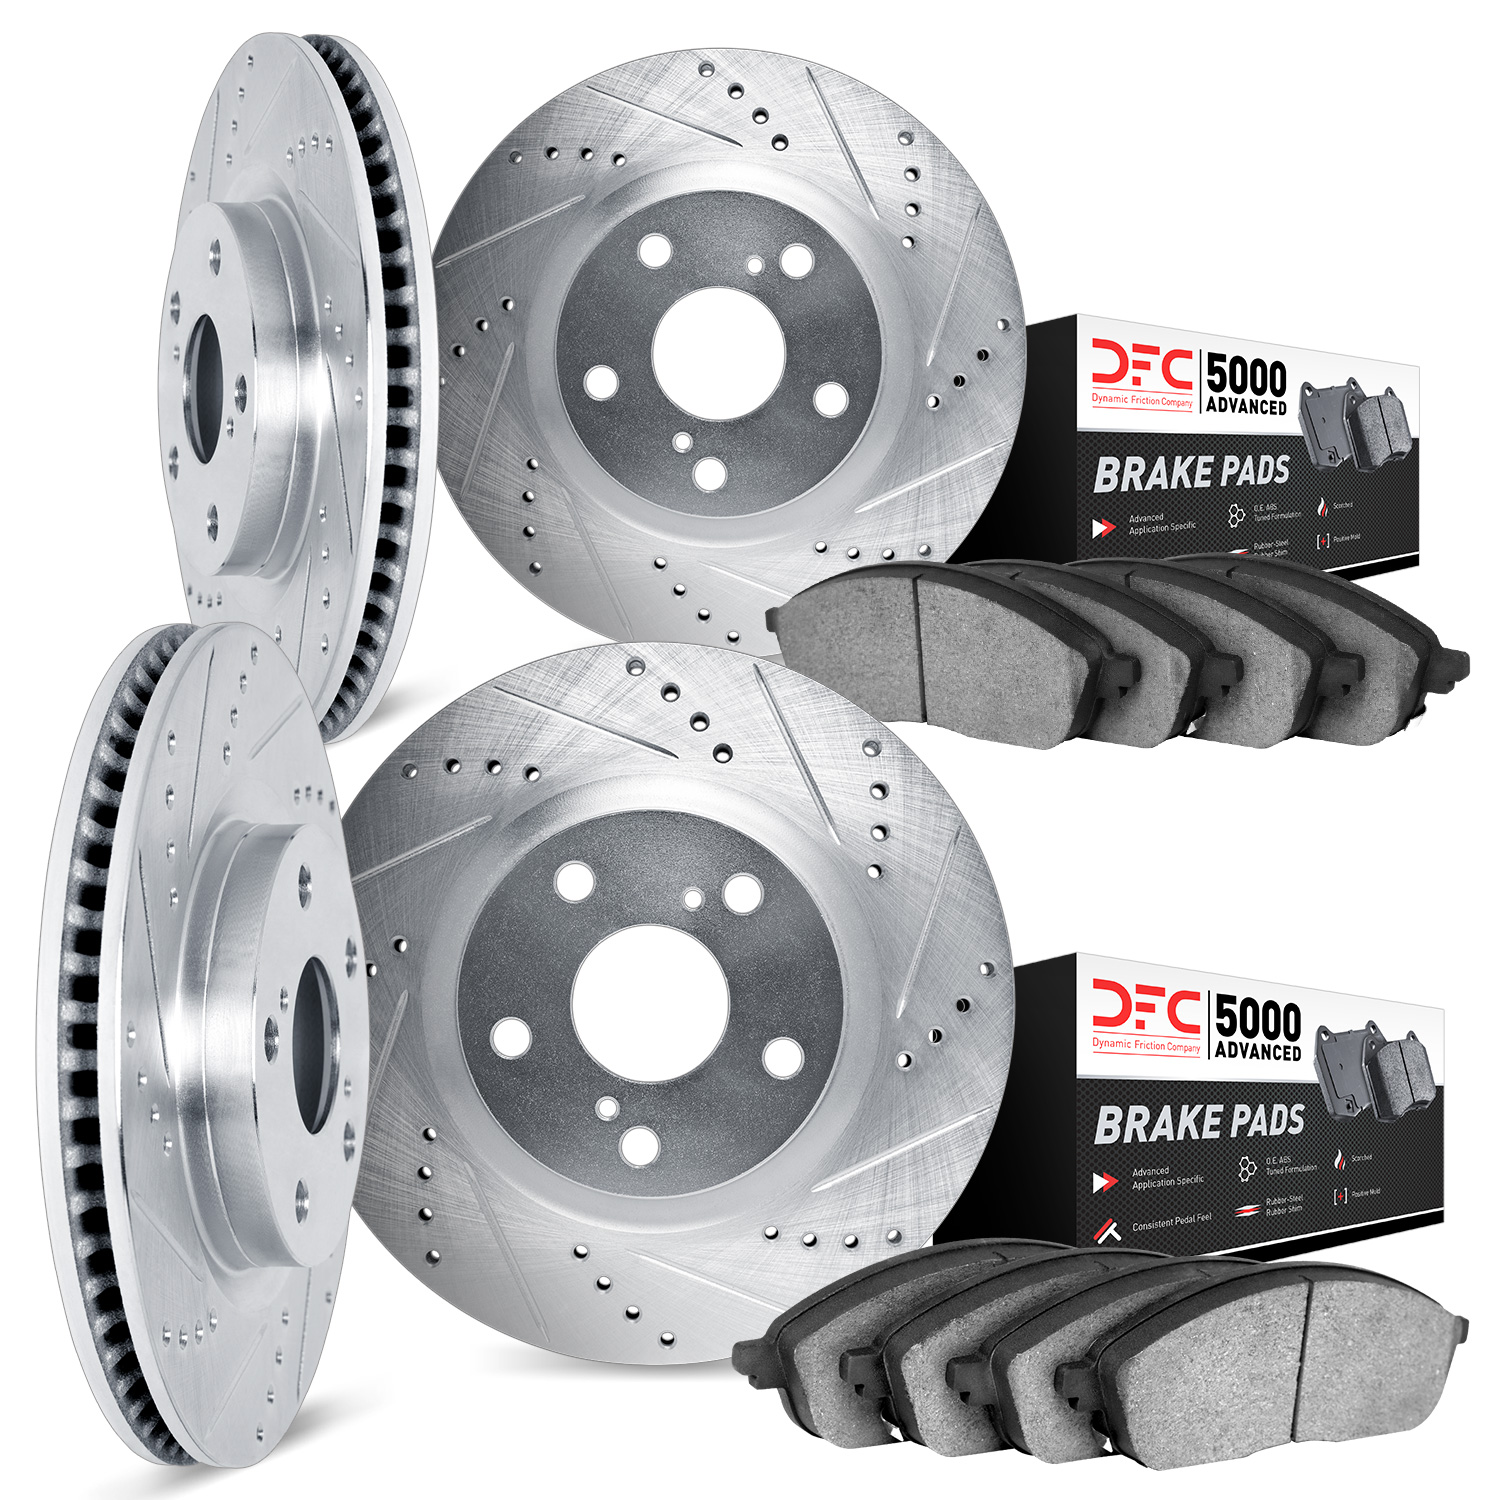 7504-75004 Drilled/Slotted Brake Rotors w/5000 Advanced Brake Pads Kit [Silver], 2001-2006 Lexus/Toyota/Scion, Position: Front a